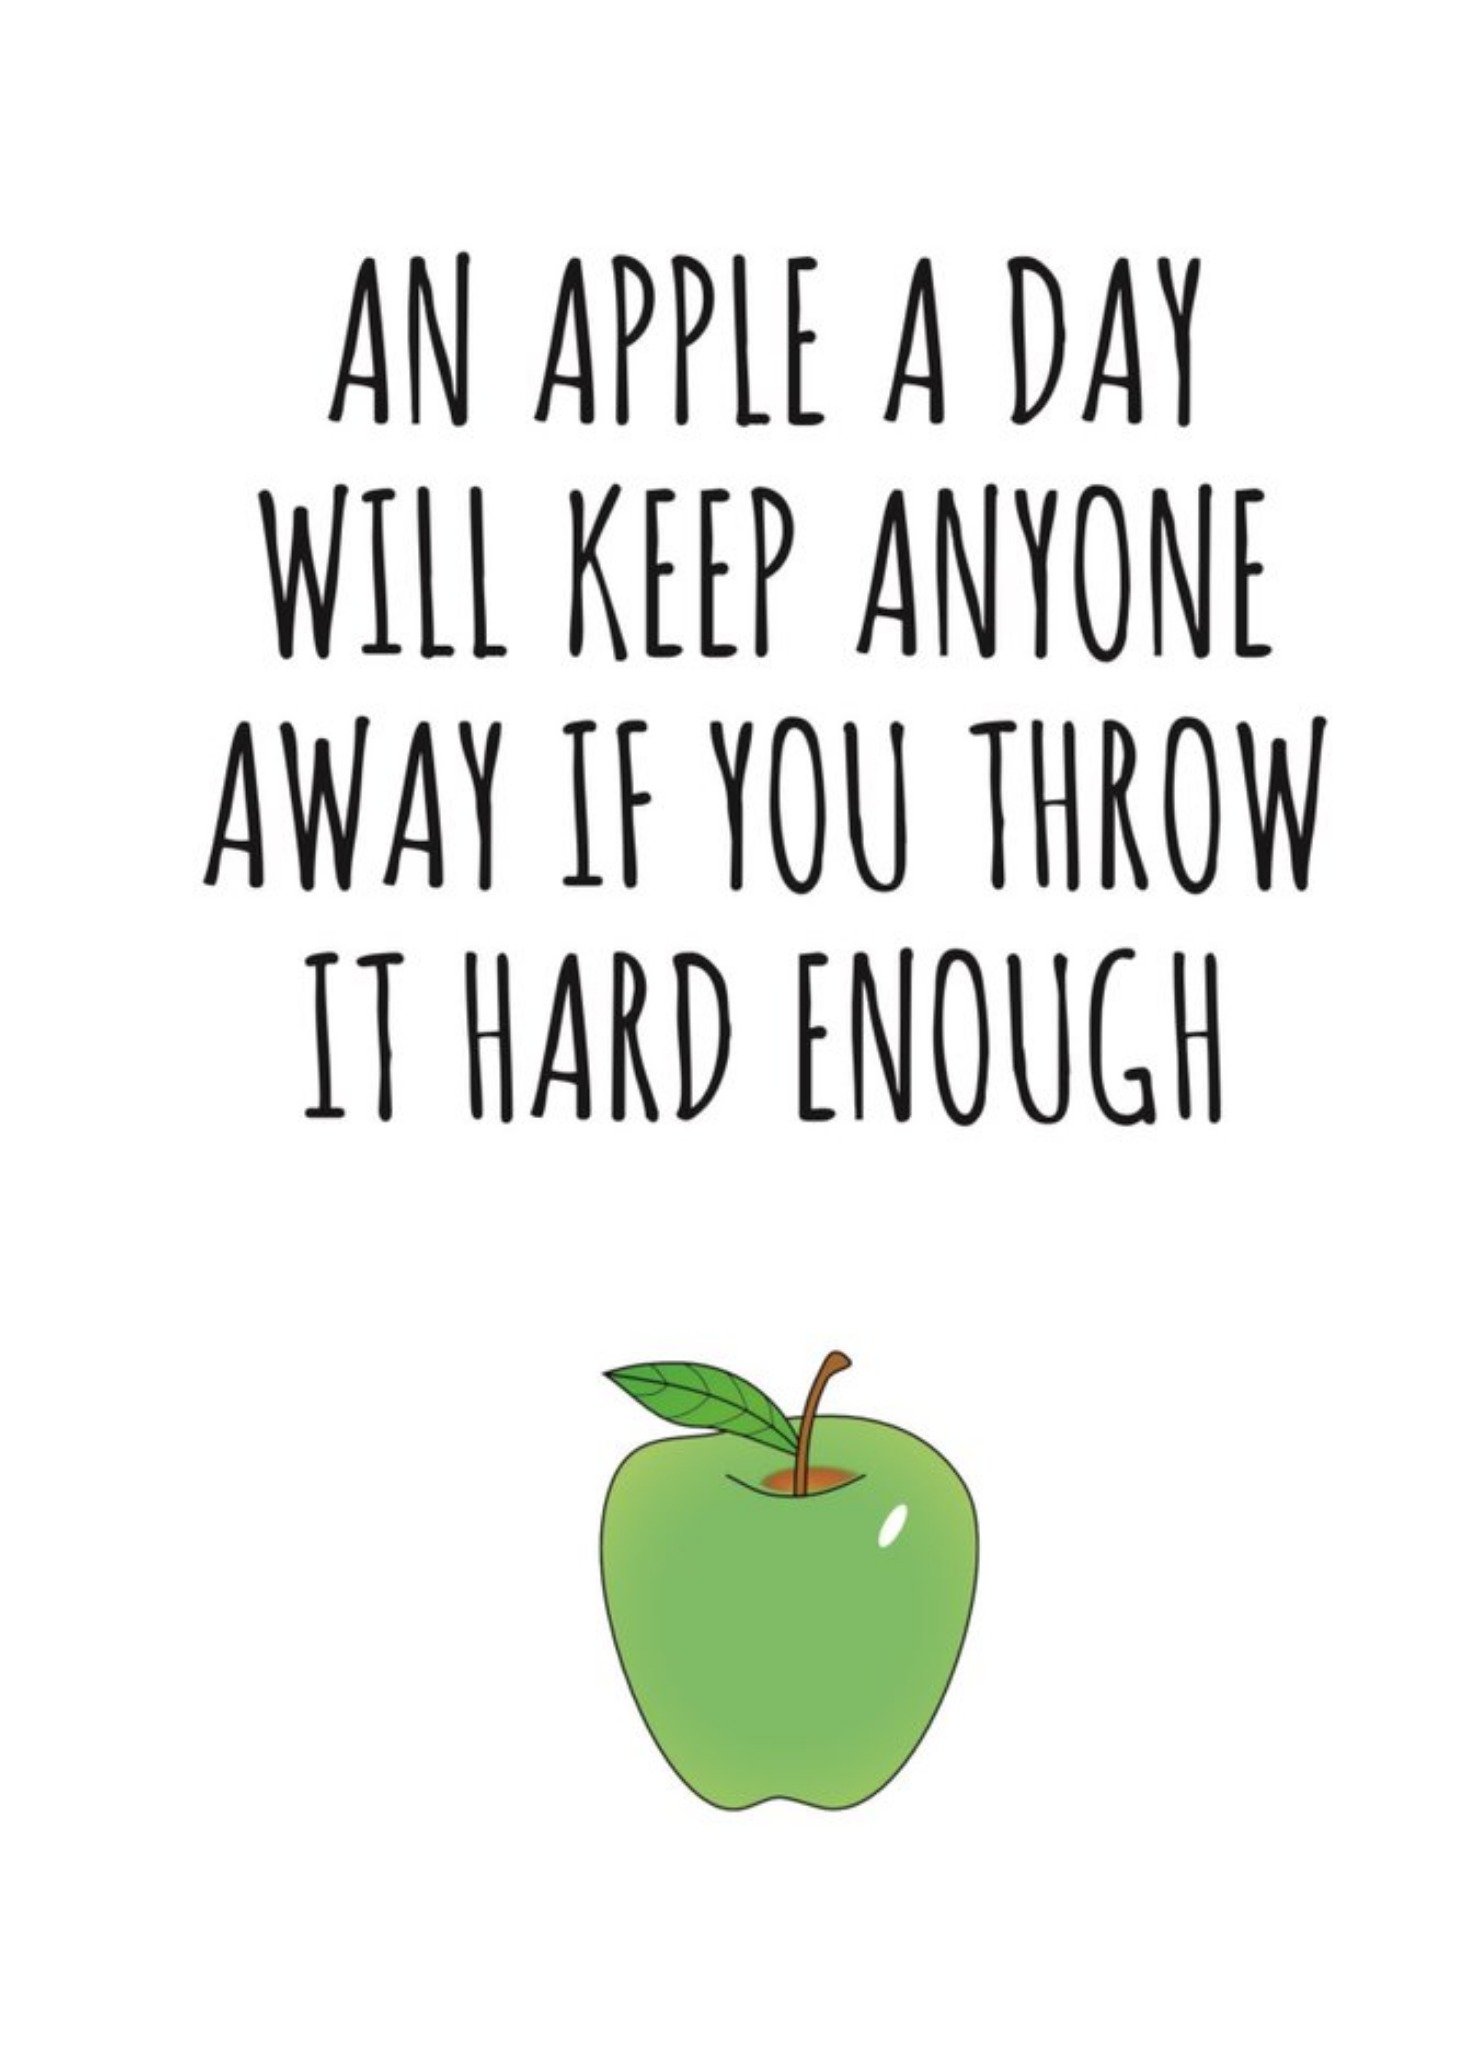 Banter King Typographical An Apple A Day Will Keep Everyone Away If You Throw Hard Enough Card Ecard